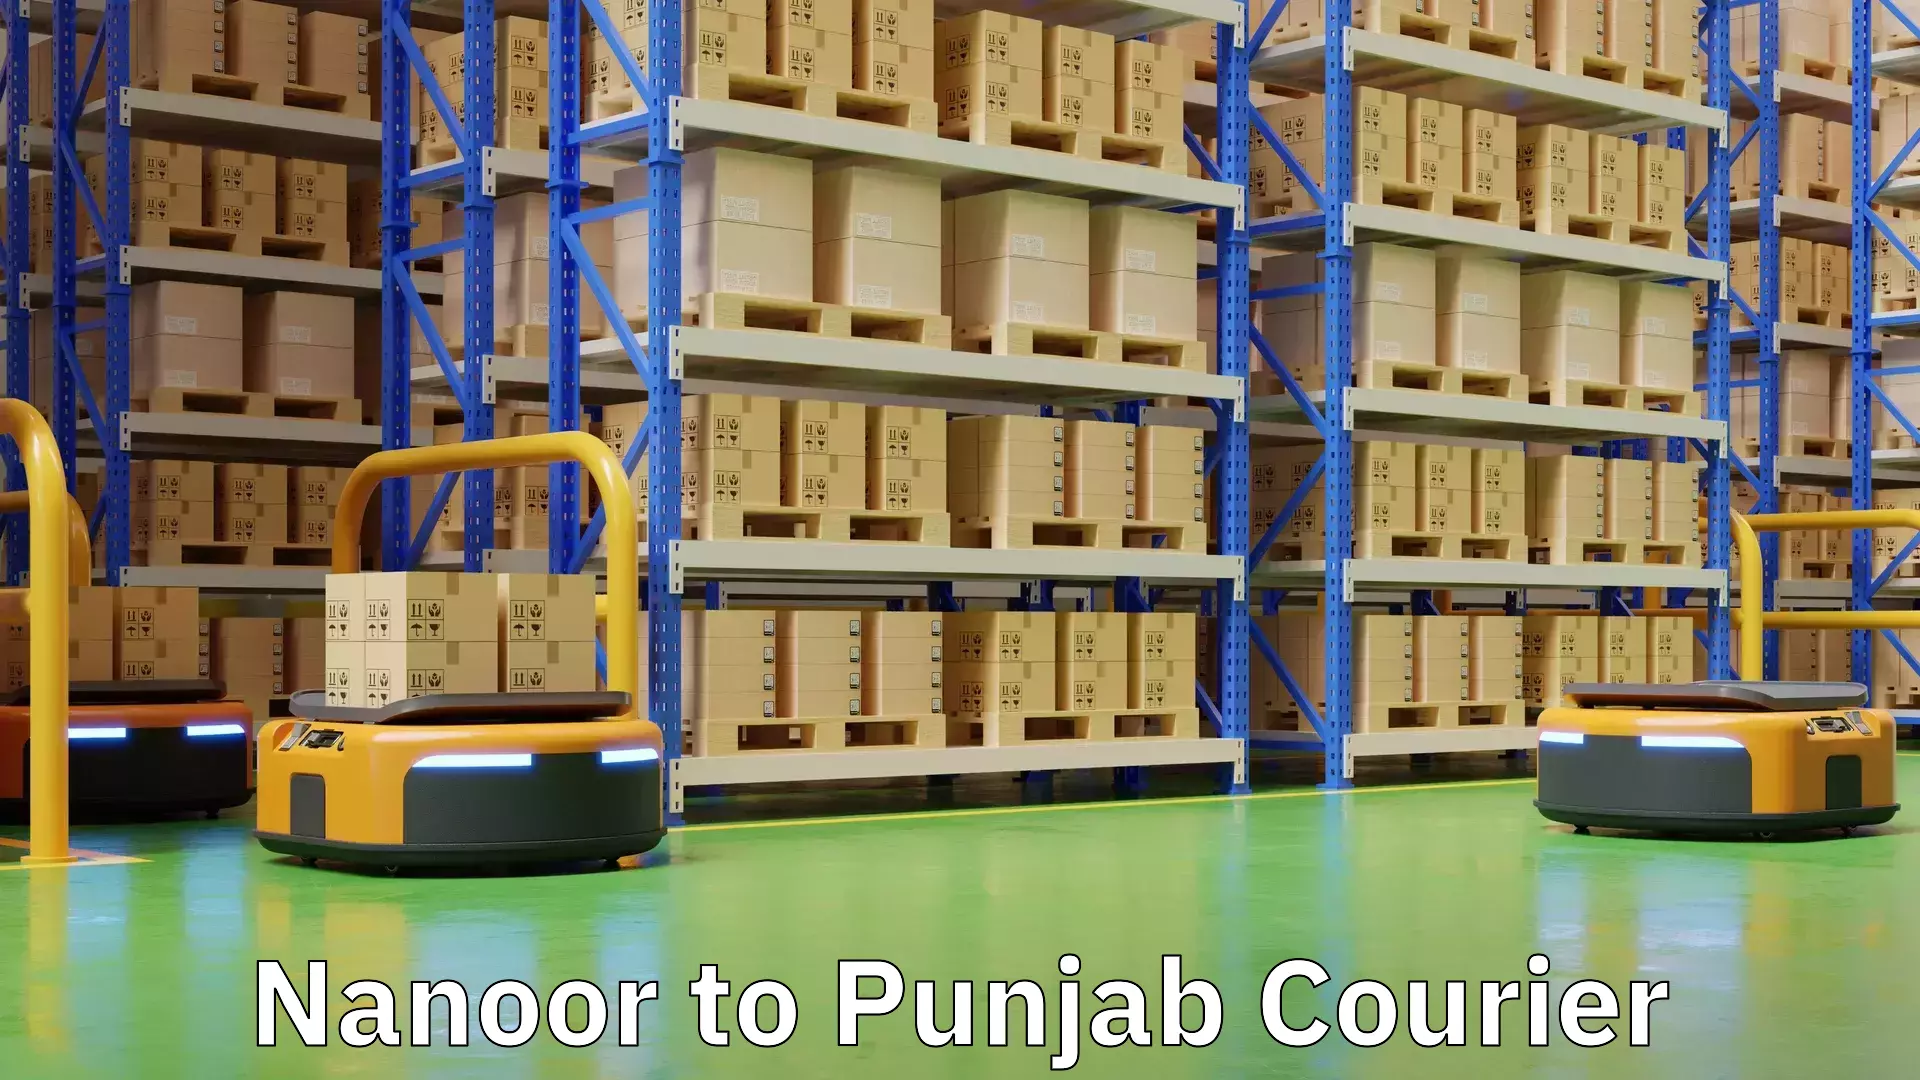 Multi-national courier services Nanoor to Amritsar